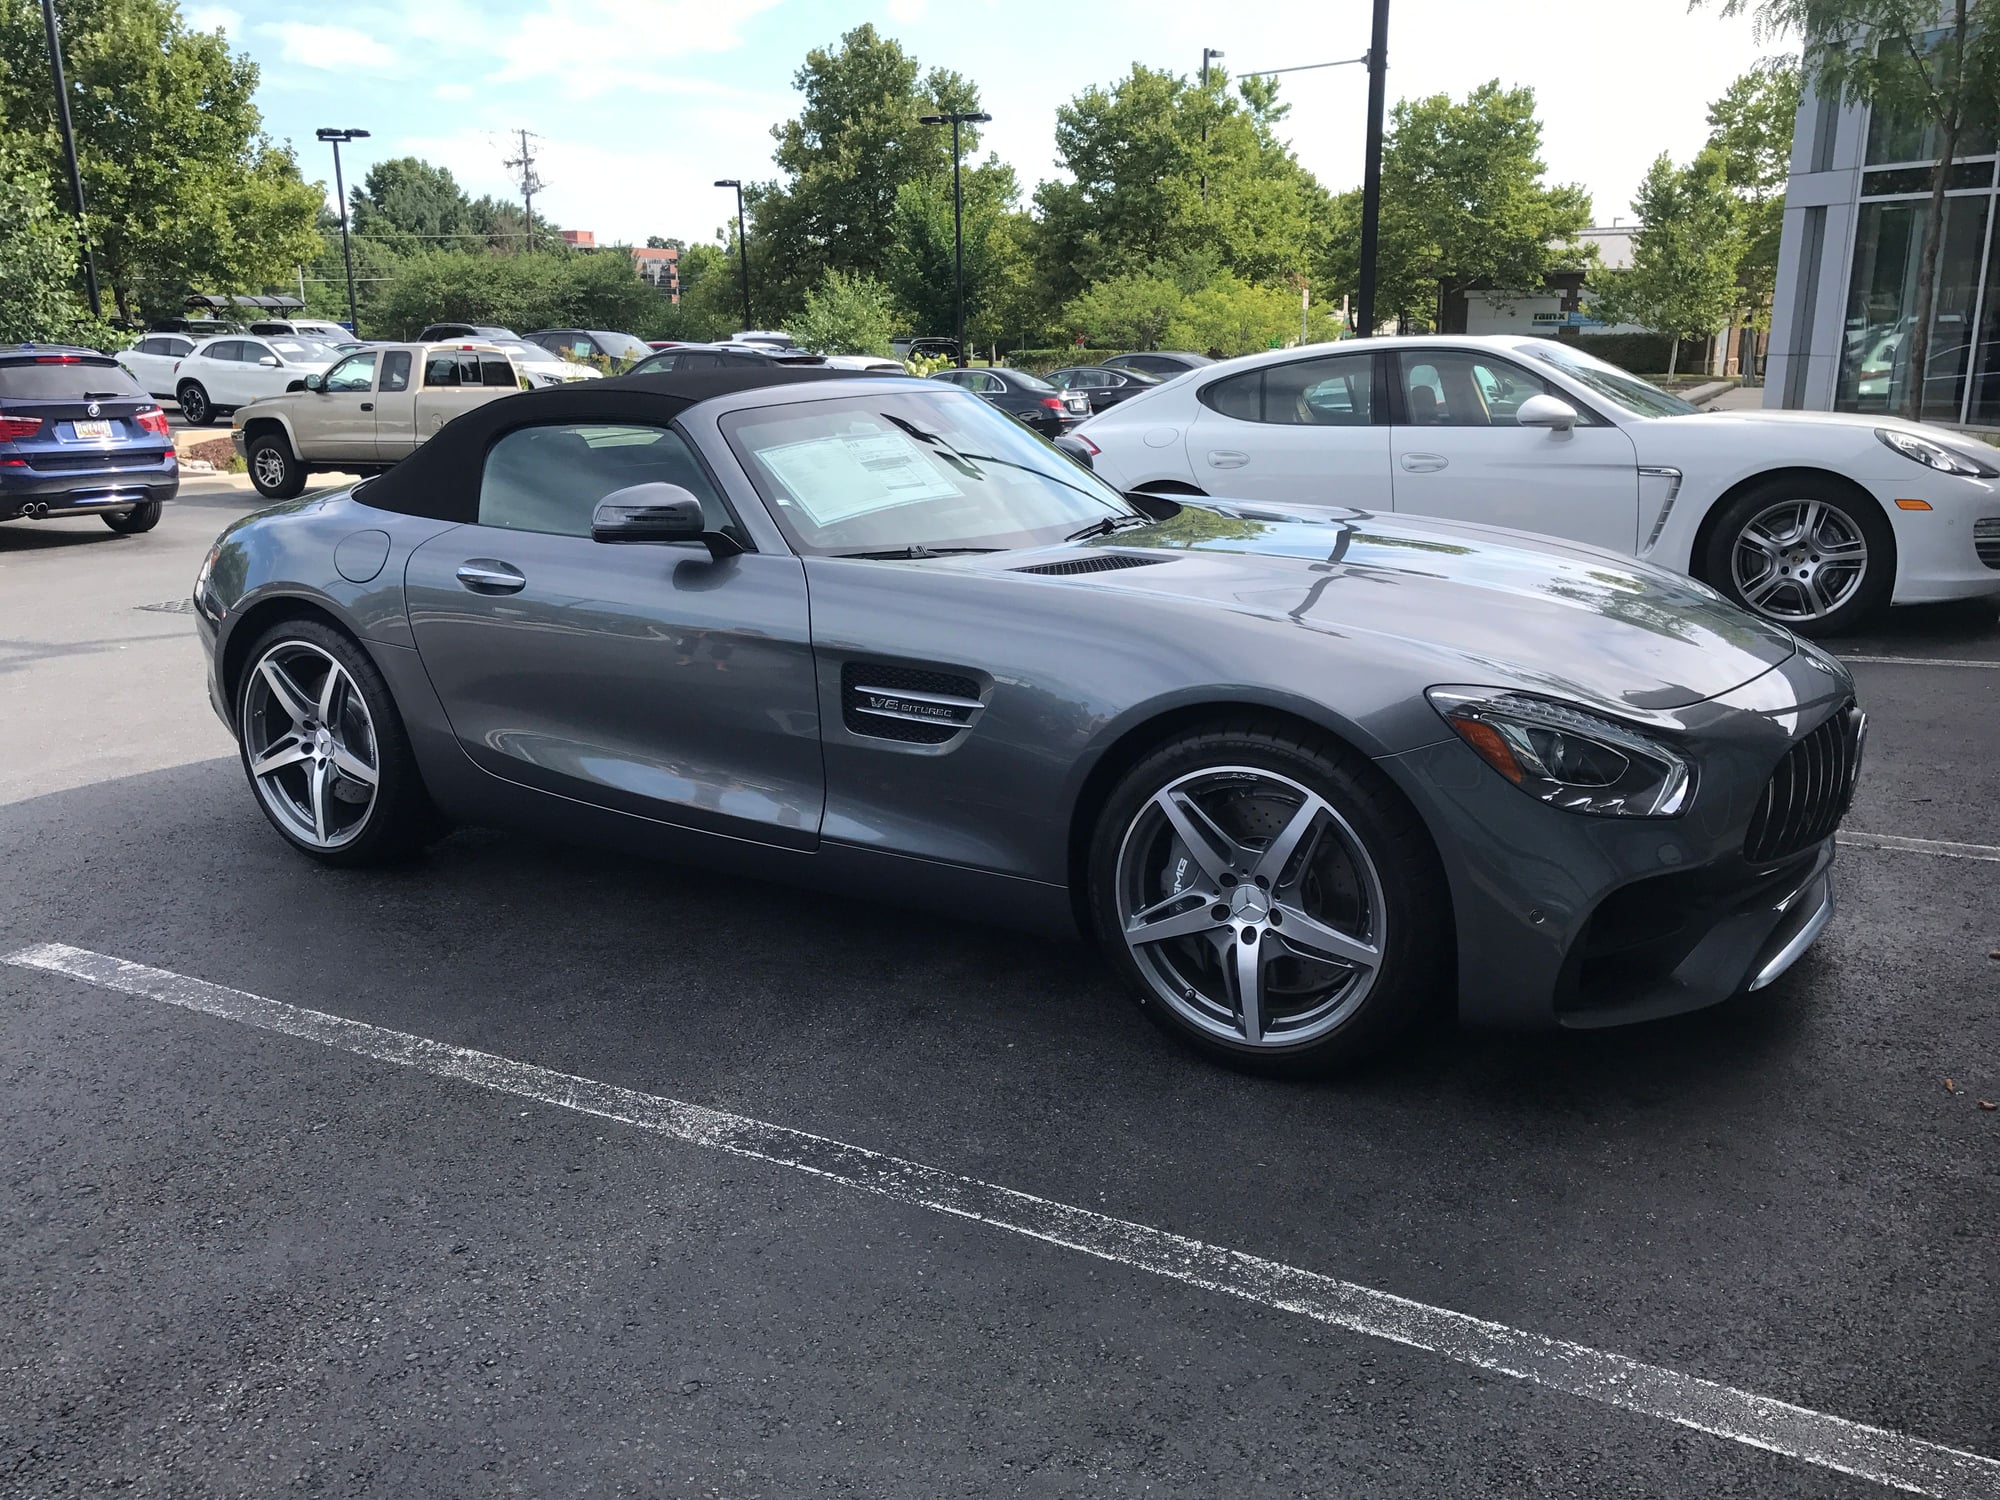 Wheels and Tires/Axles - AMG GT/GTS OEM Split Spoke Wheels and Tires Very Low miles Michelin Super Sport Tires - Used - 2016 to 2019 Mercedes-Benz AMG GT - Mclean, VA 22101, United States